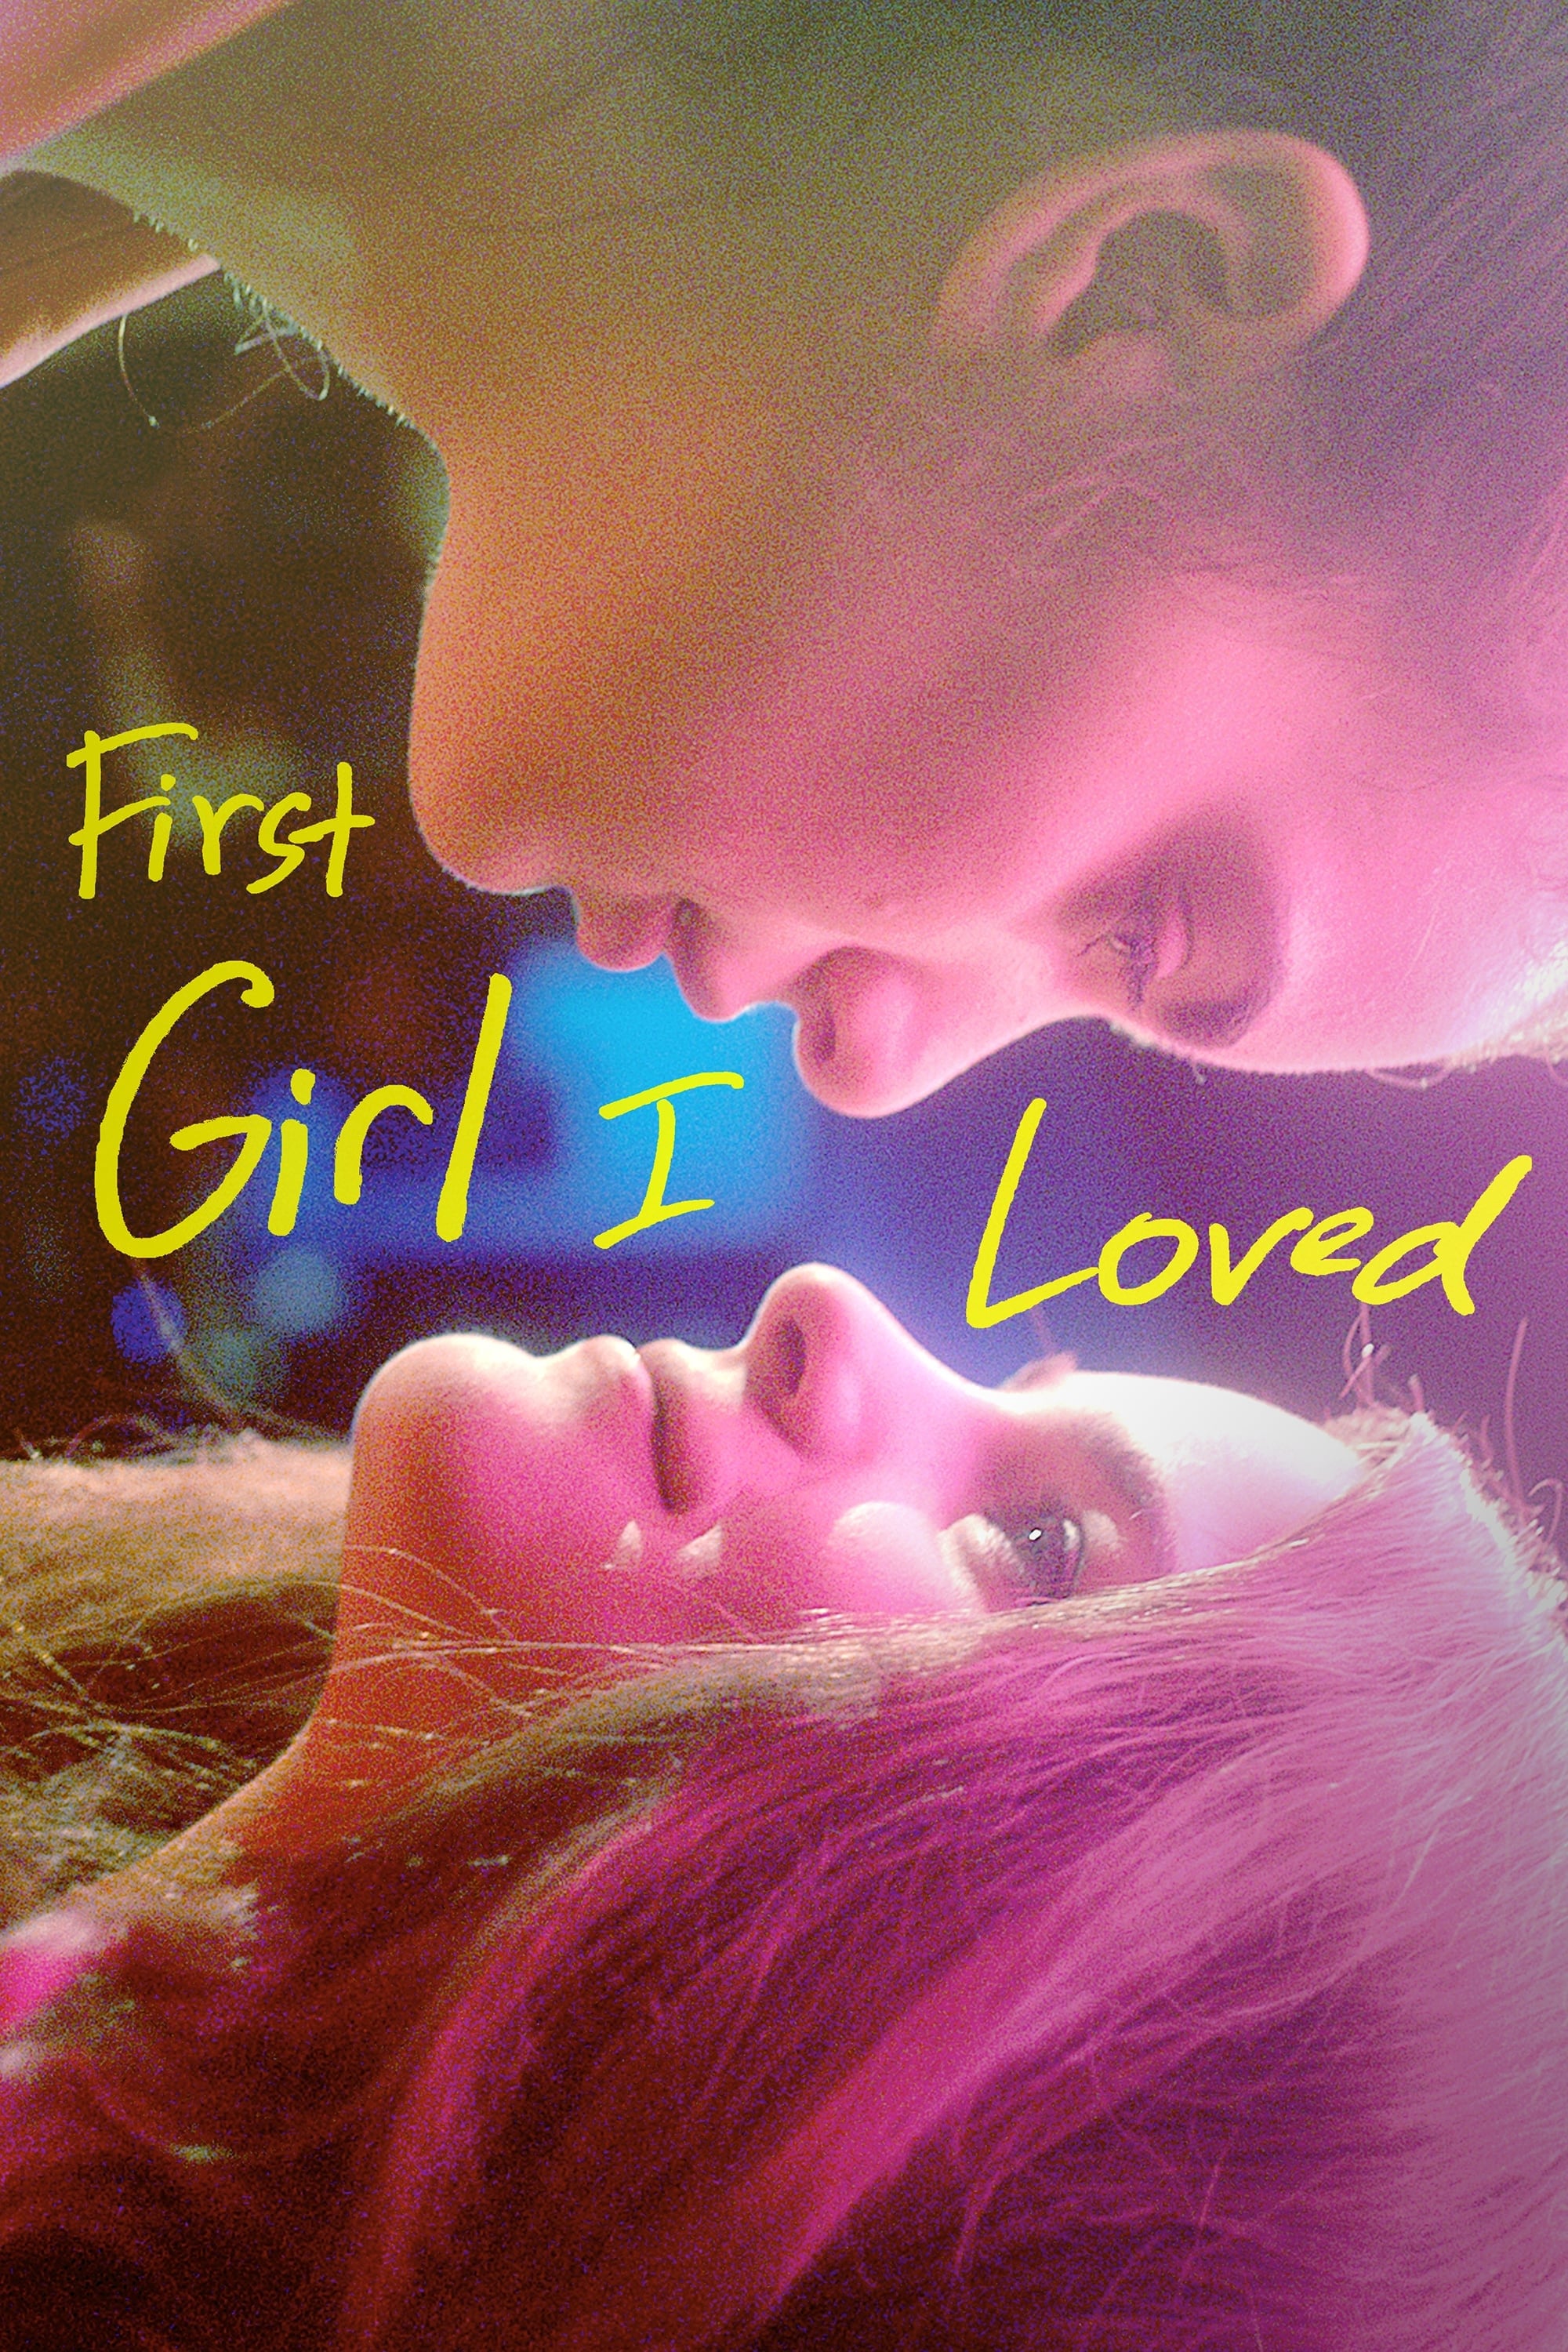 Caratula de First Girl I Loved (First Girl I Loved) 